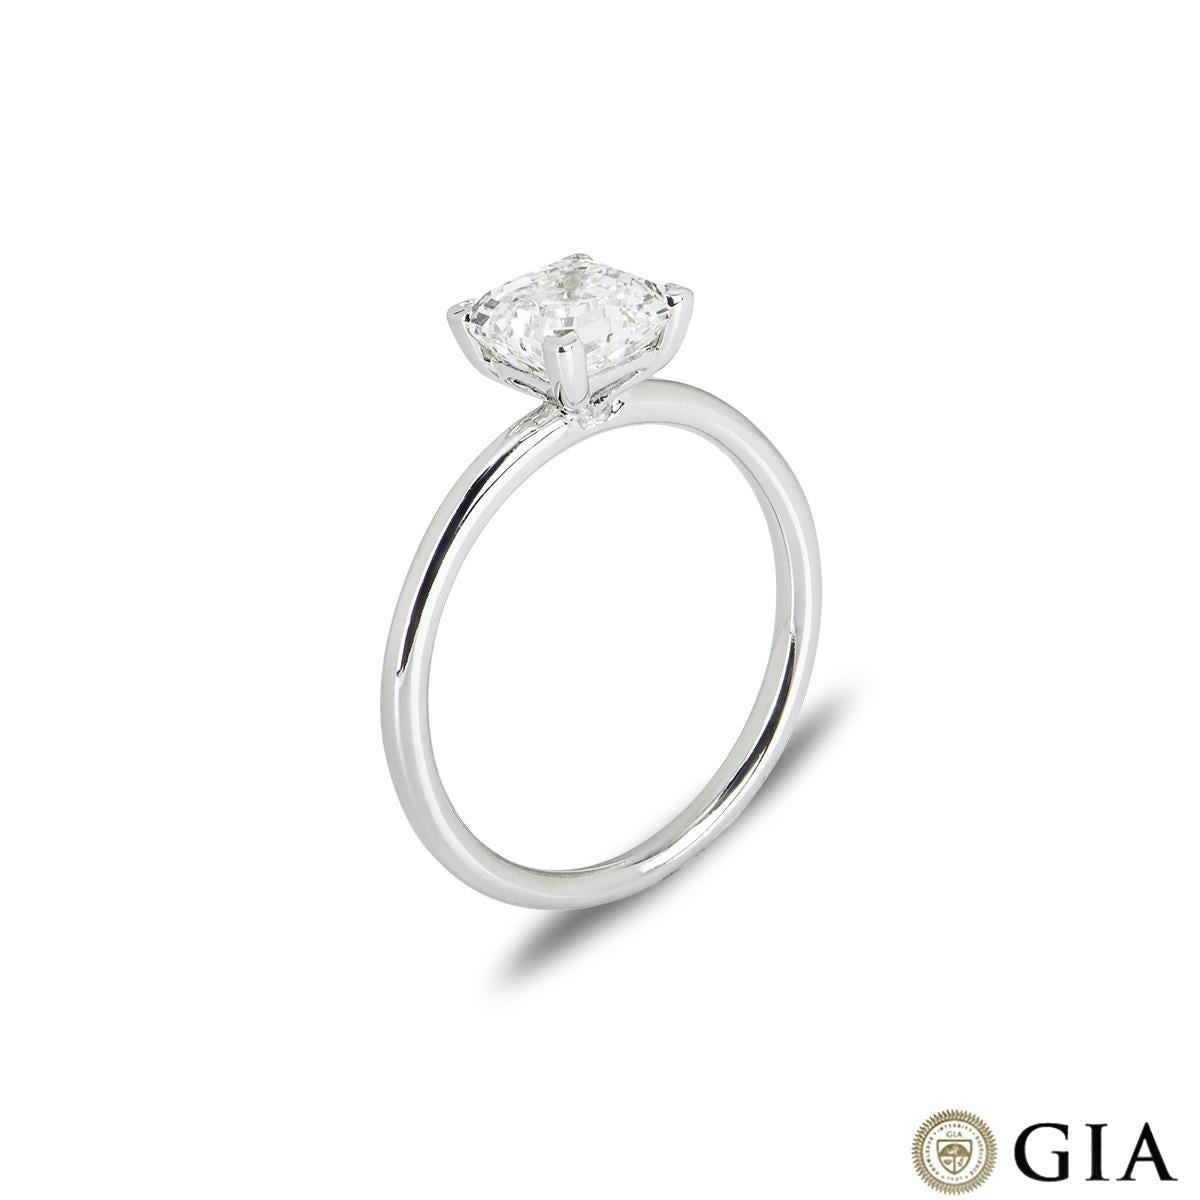 A striking 18k white gold diamond engagement ring. The solitaire features an Asscher cut diamond in a four claw mount weighing 1.50ct, I colour and SI1 clarity. The ring measures 1.70mm wide, has a gross weight of 2.44 grams and is currently a UK